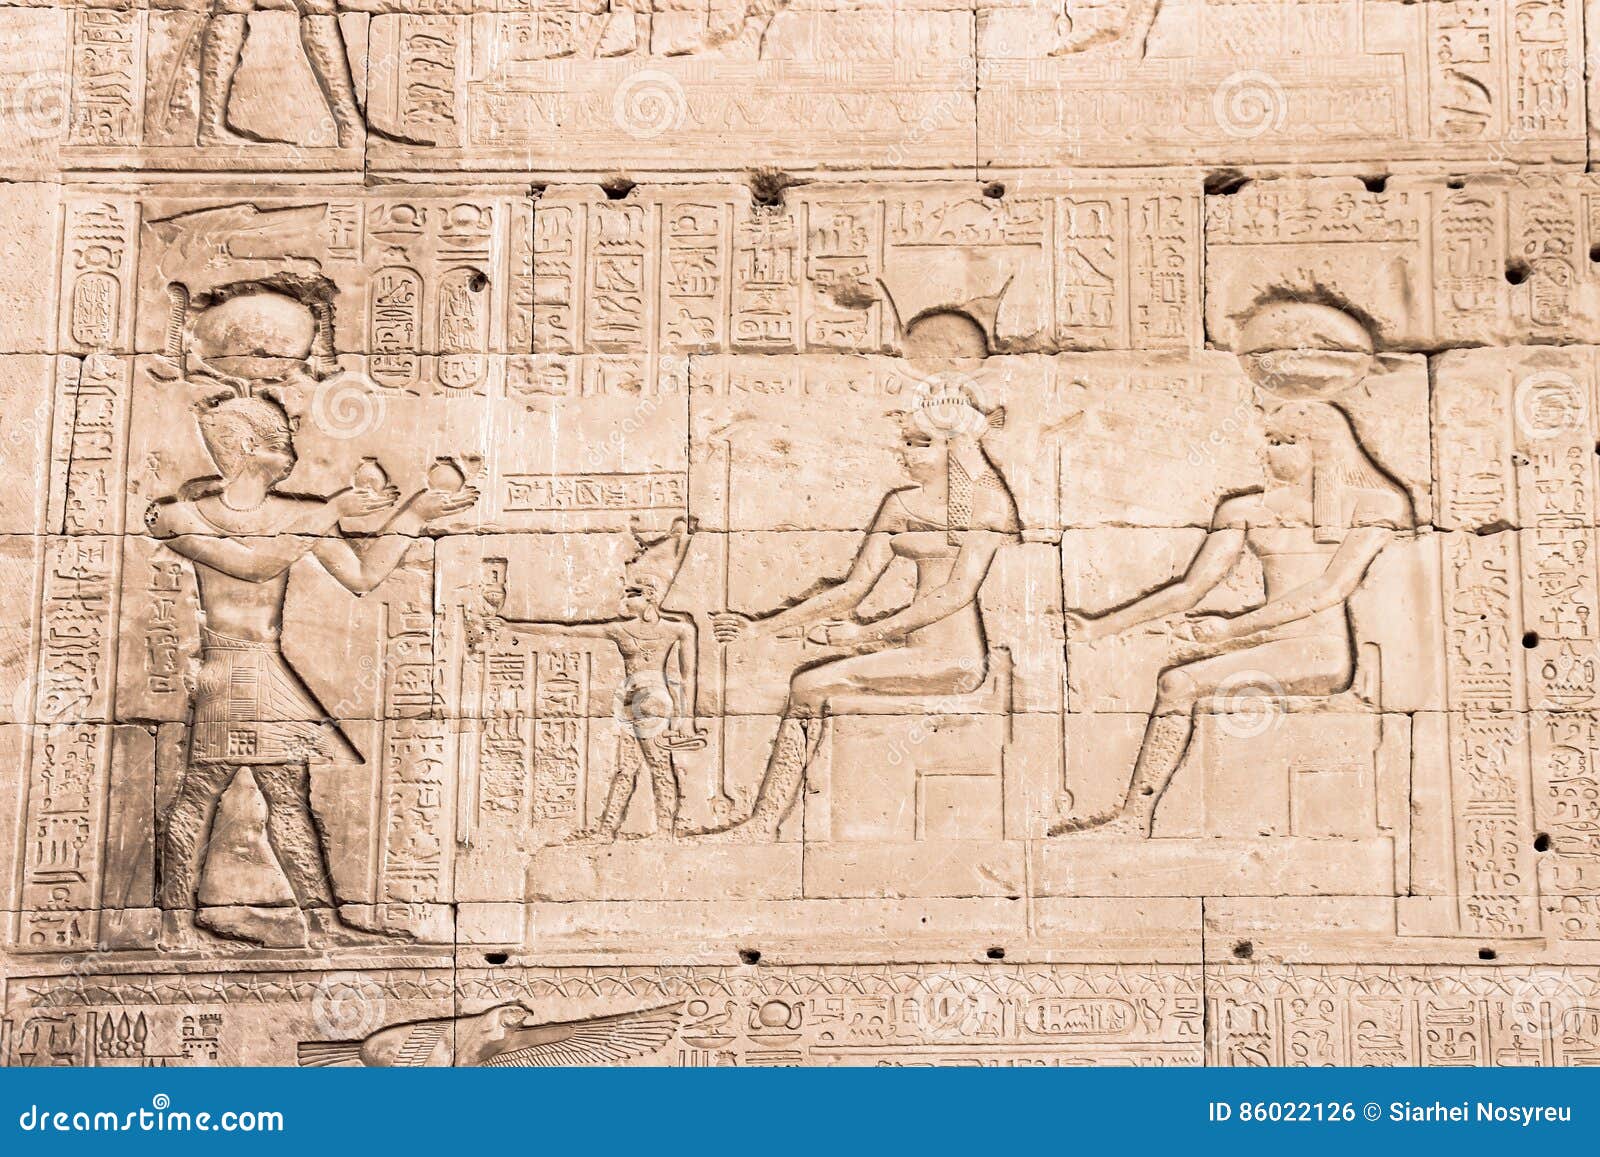 wall of the temple of hathor at dendera.